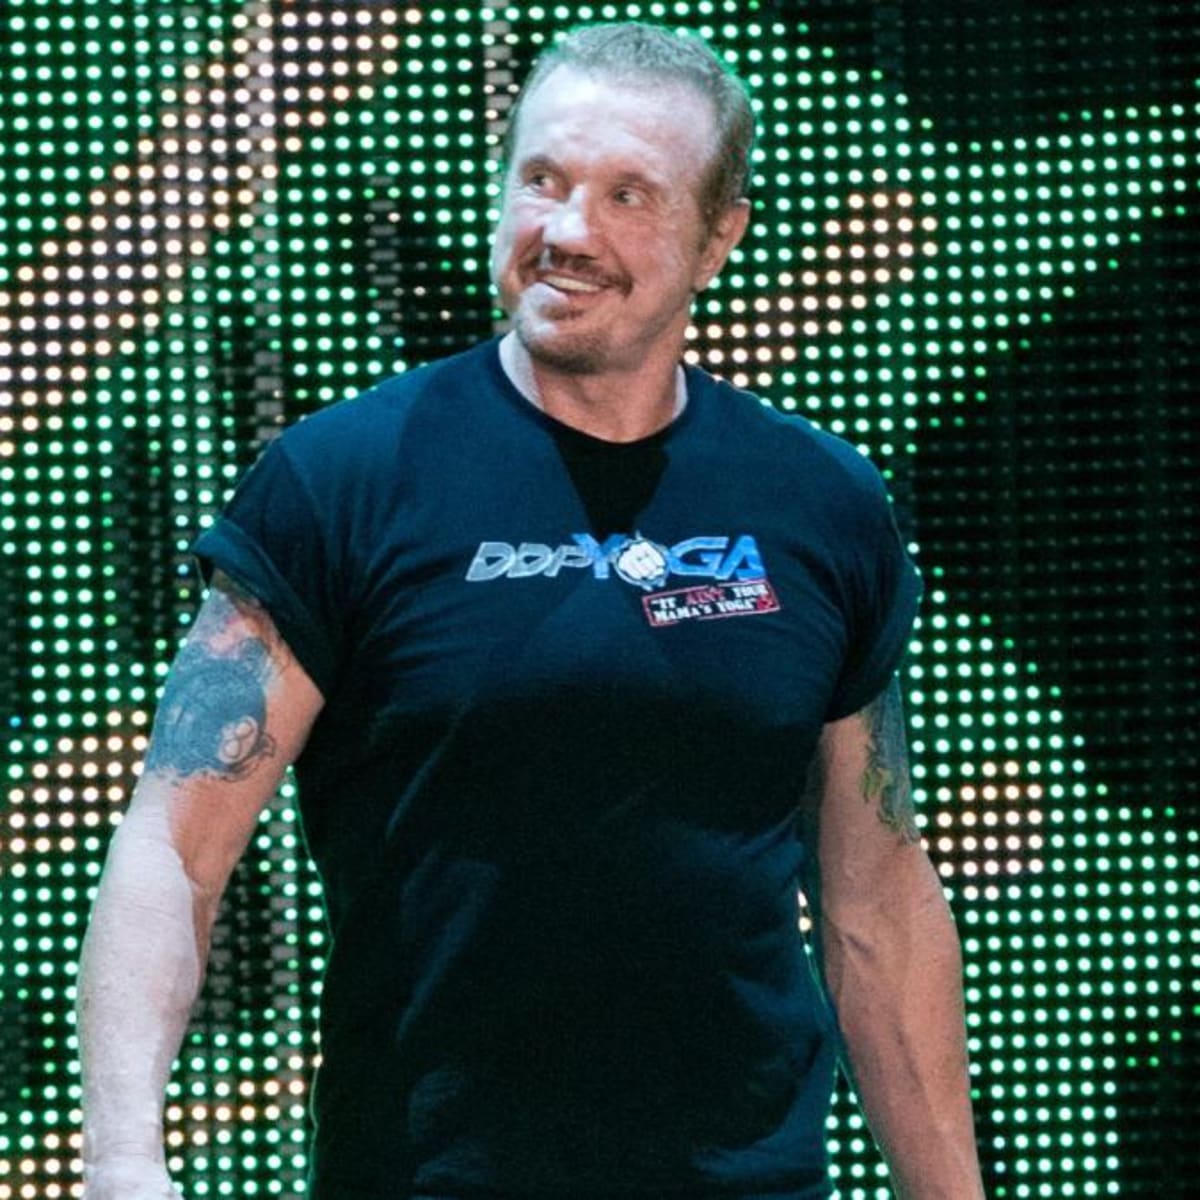 Diamond Dallas Page: DDP Yoga partners with NFL Alumni - Sports Illustrated